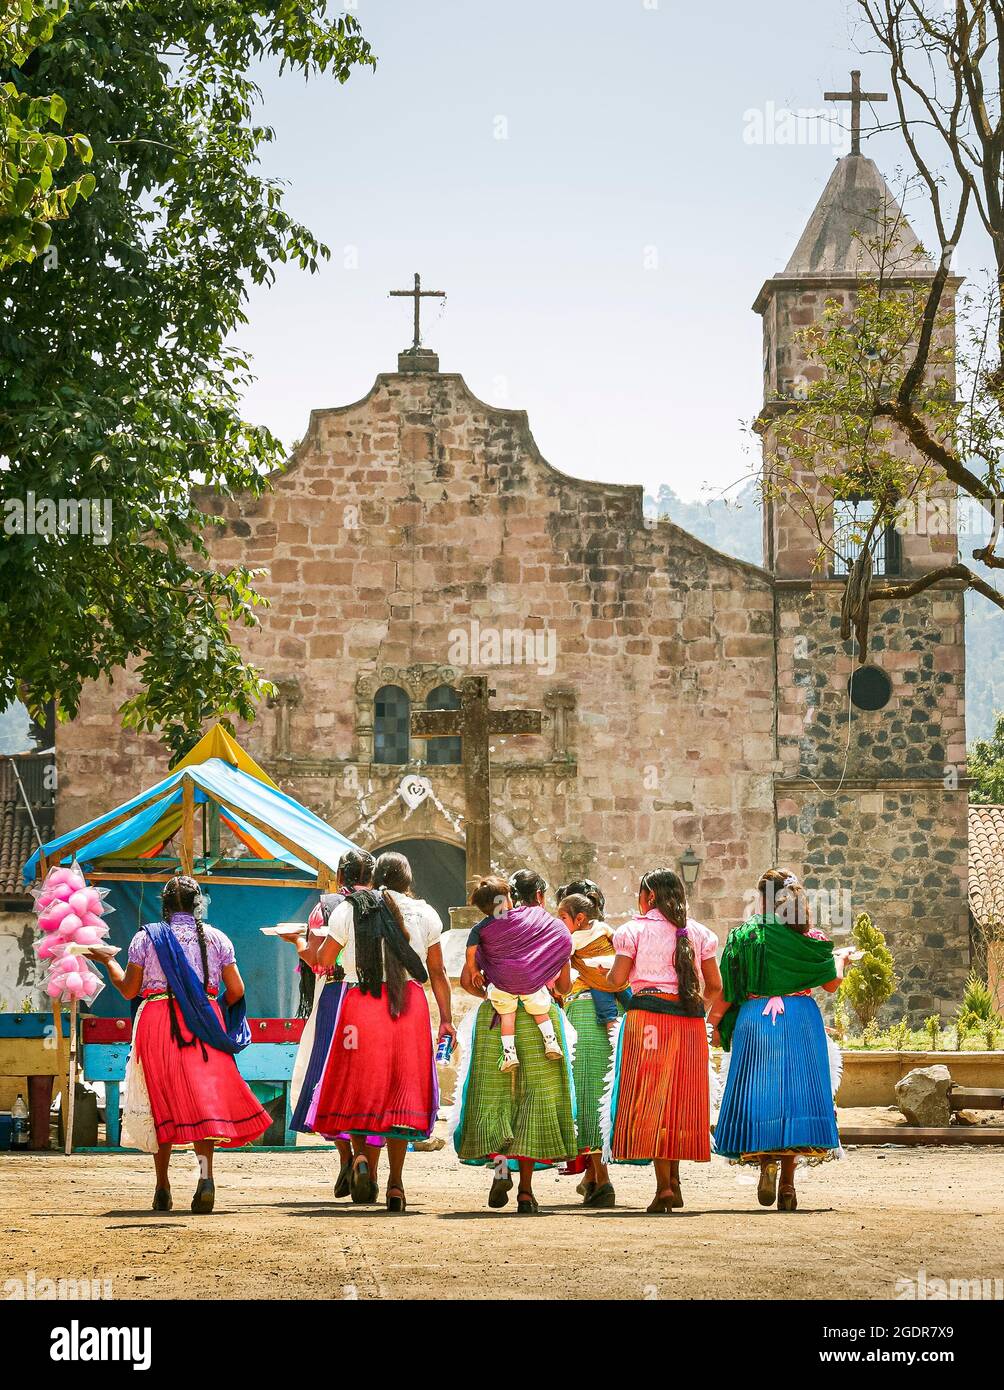 A group of colorfully dressed Purepecha women walk towards the town temple in Capacuaro, Michoacan, Mexico. Stock Photo